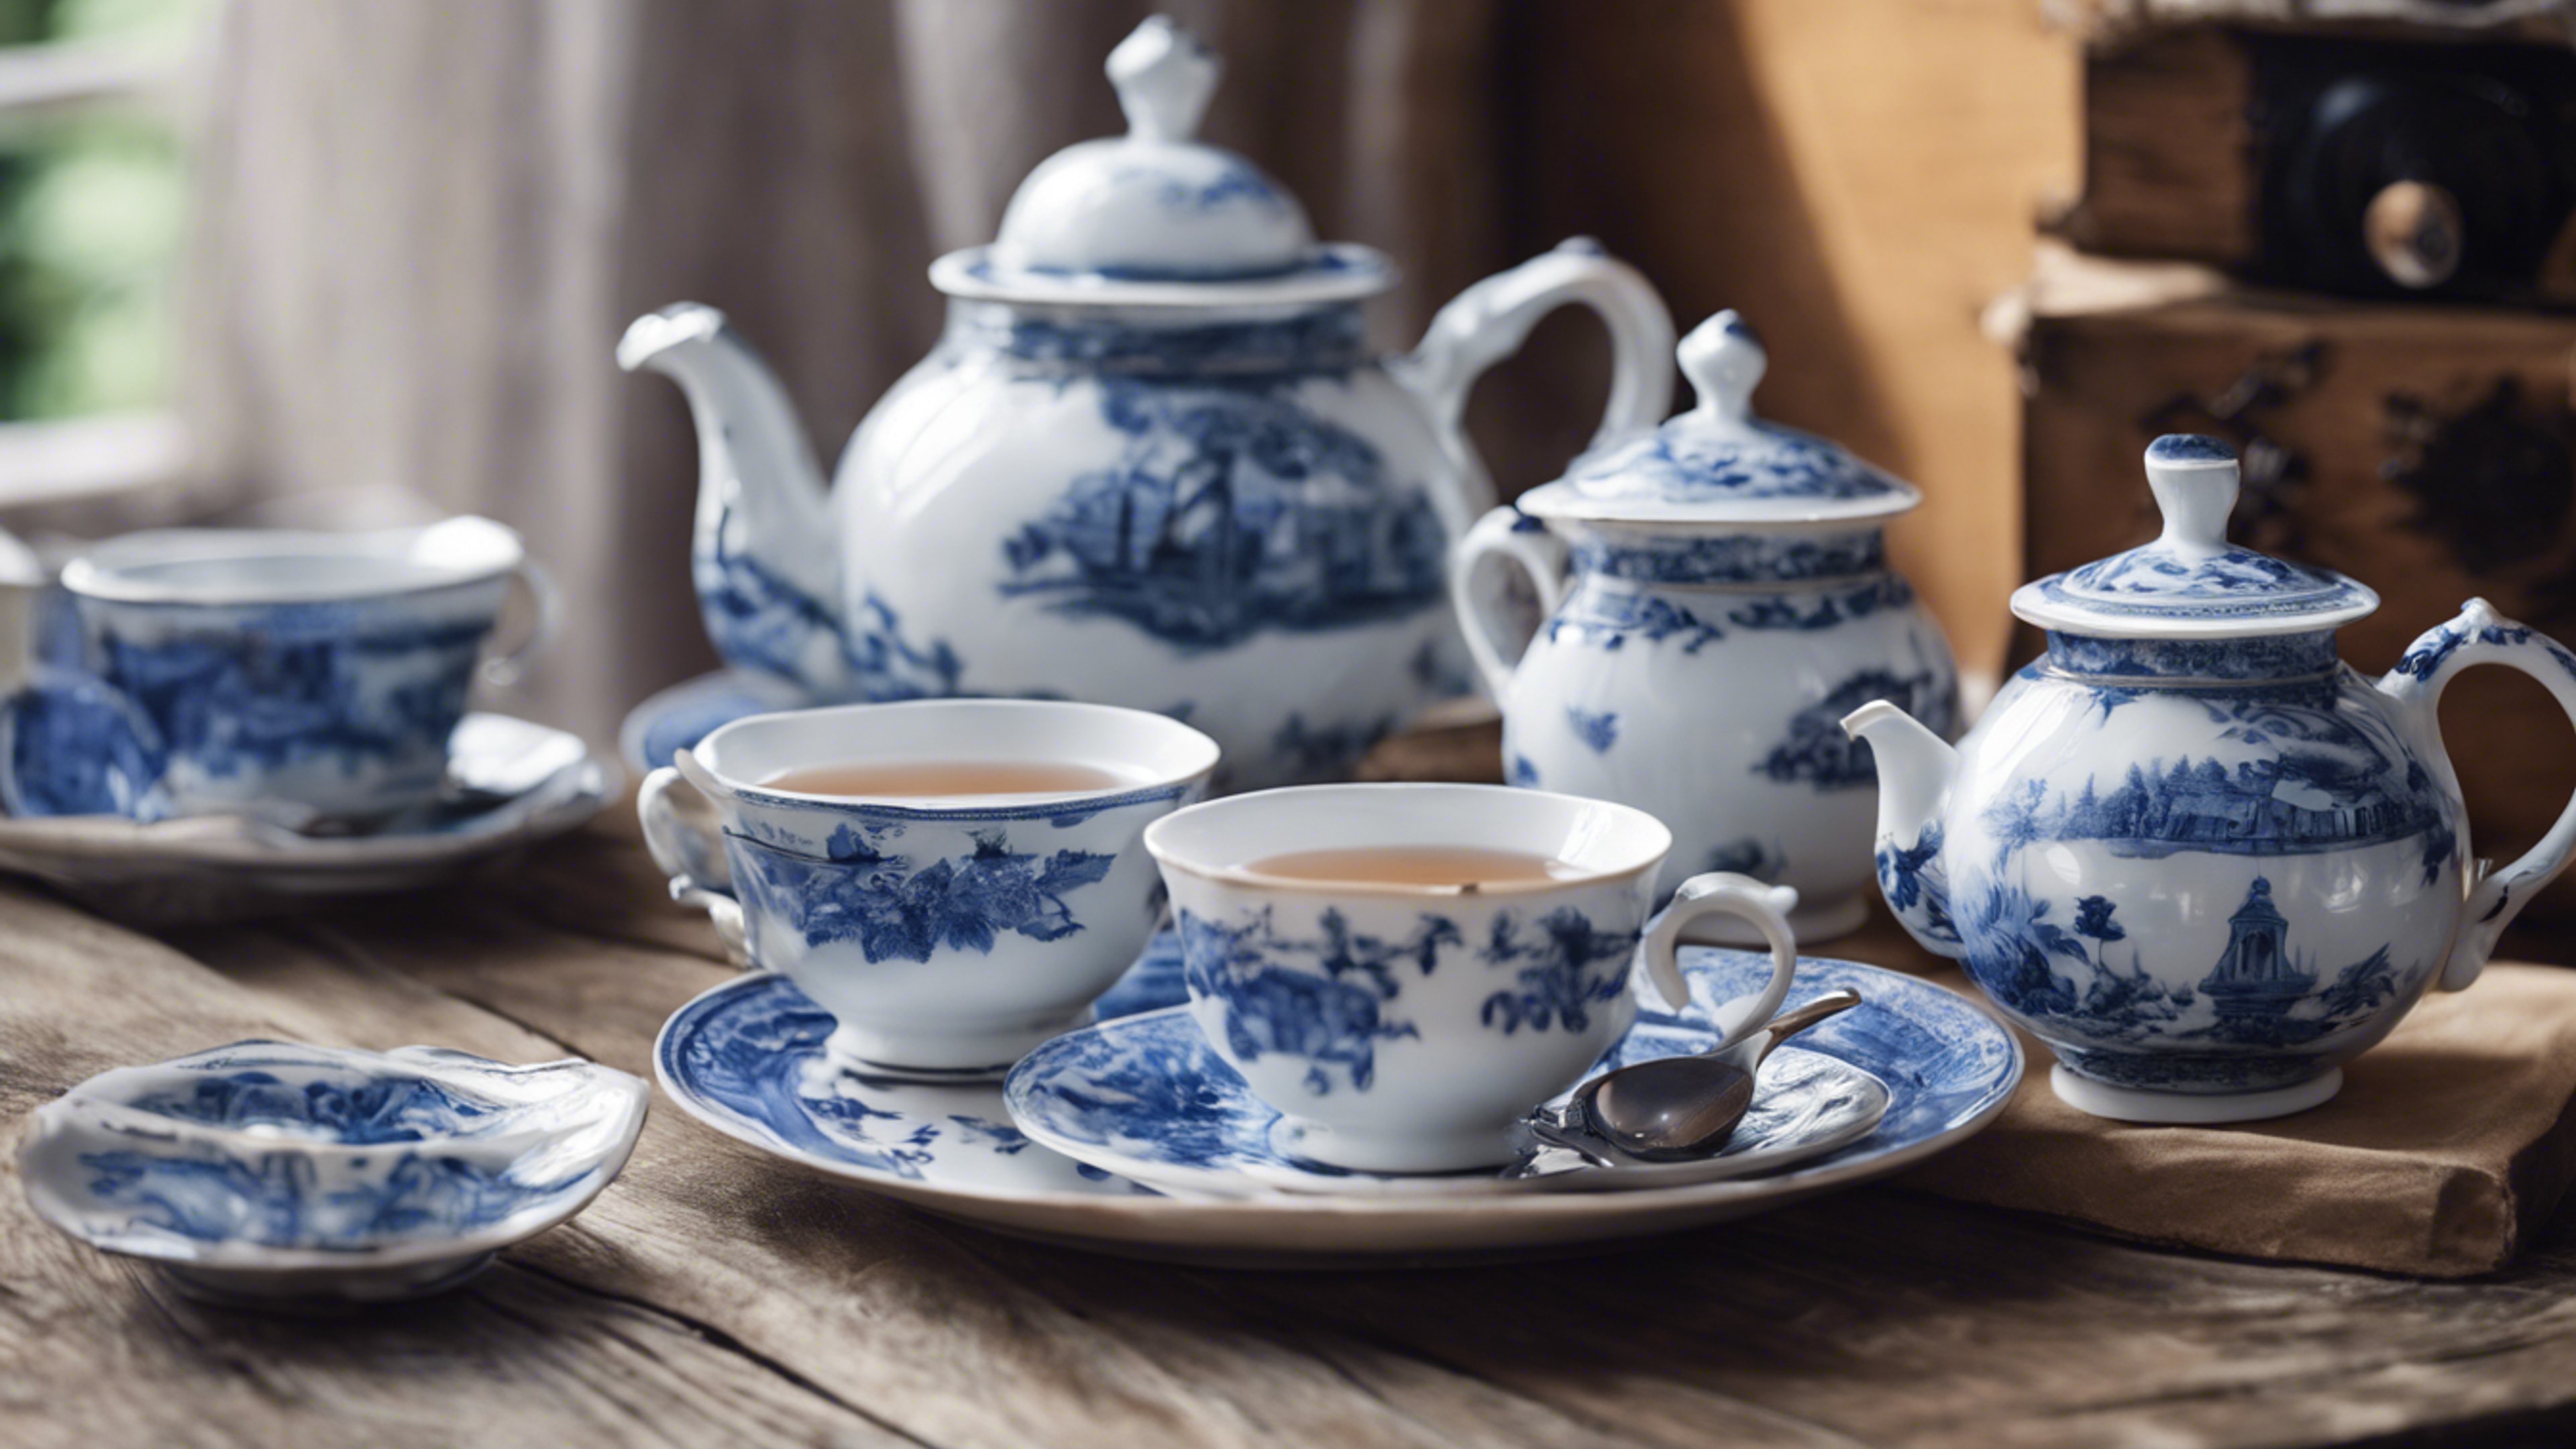 Vintage porcelain tea set in blue and white, placed on a rustic wooden table. Tapeta[4fbd951e4e494dd09da7]